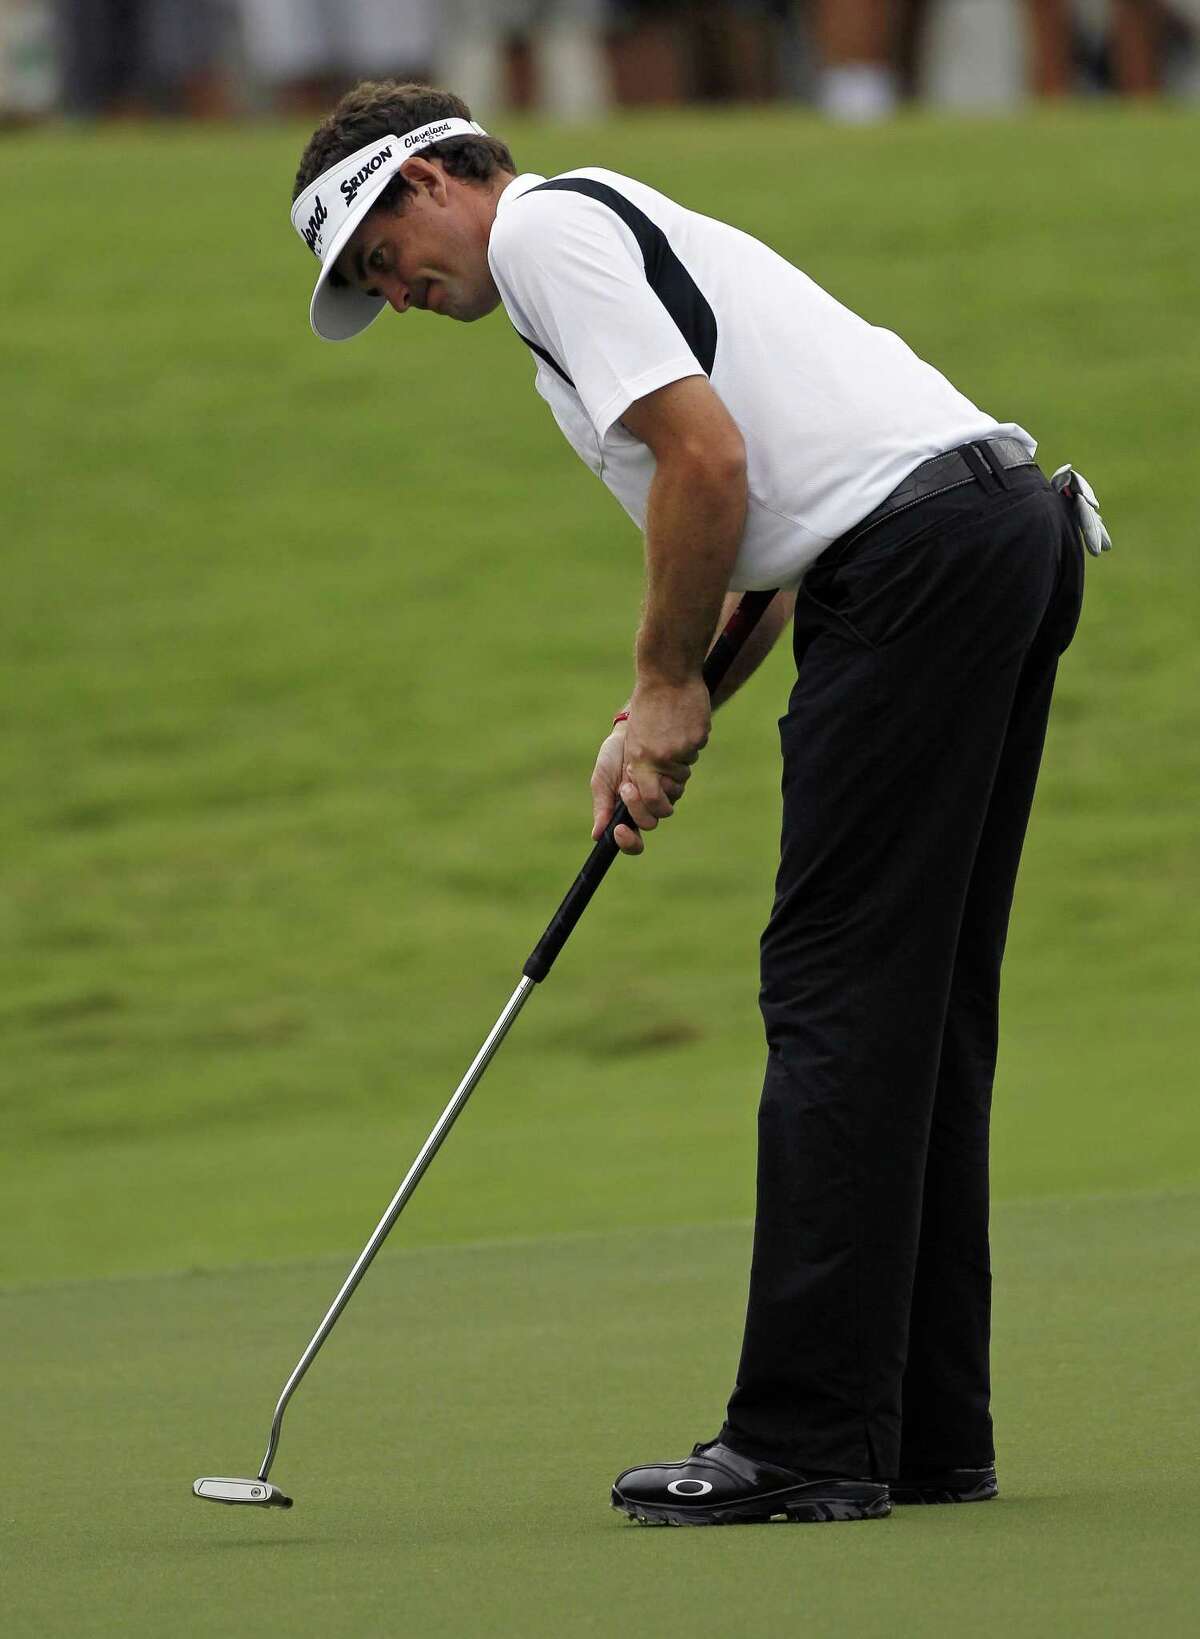 PGA golfer Keegan Bradley uses a now banned belly putter in a PGA tour event. By The Associated Press